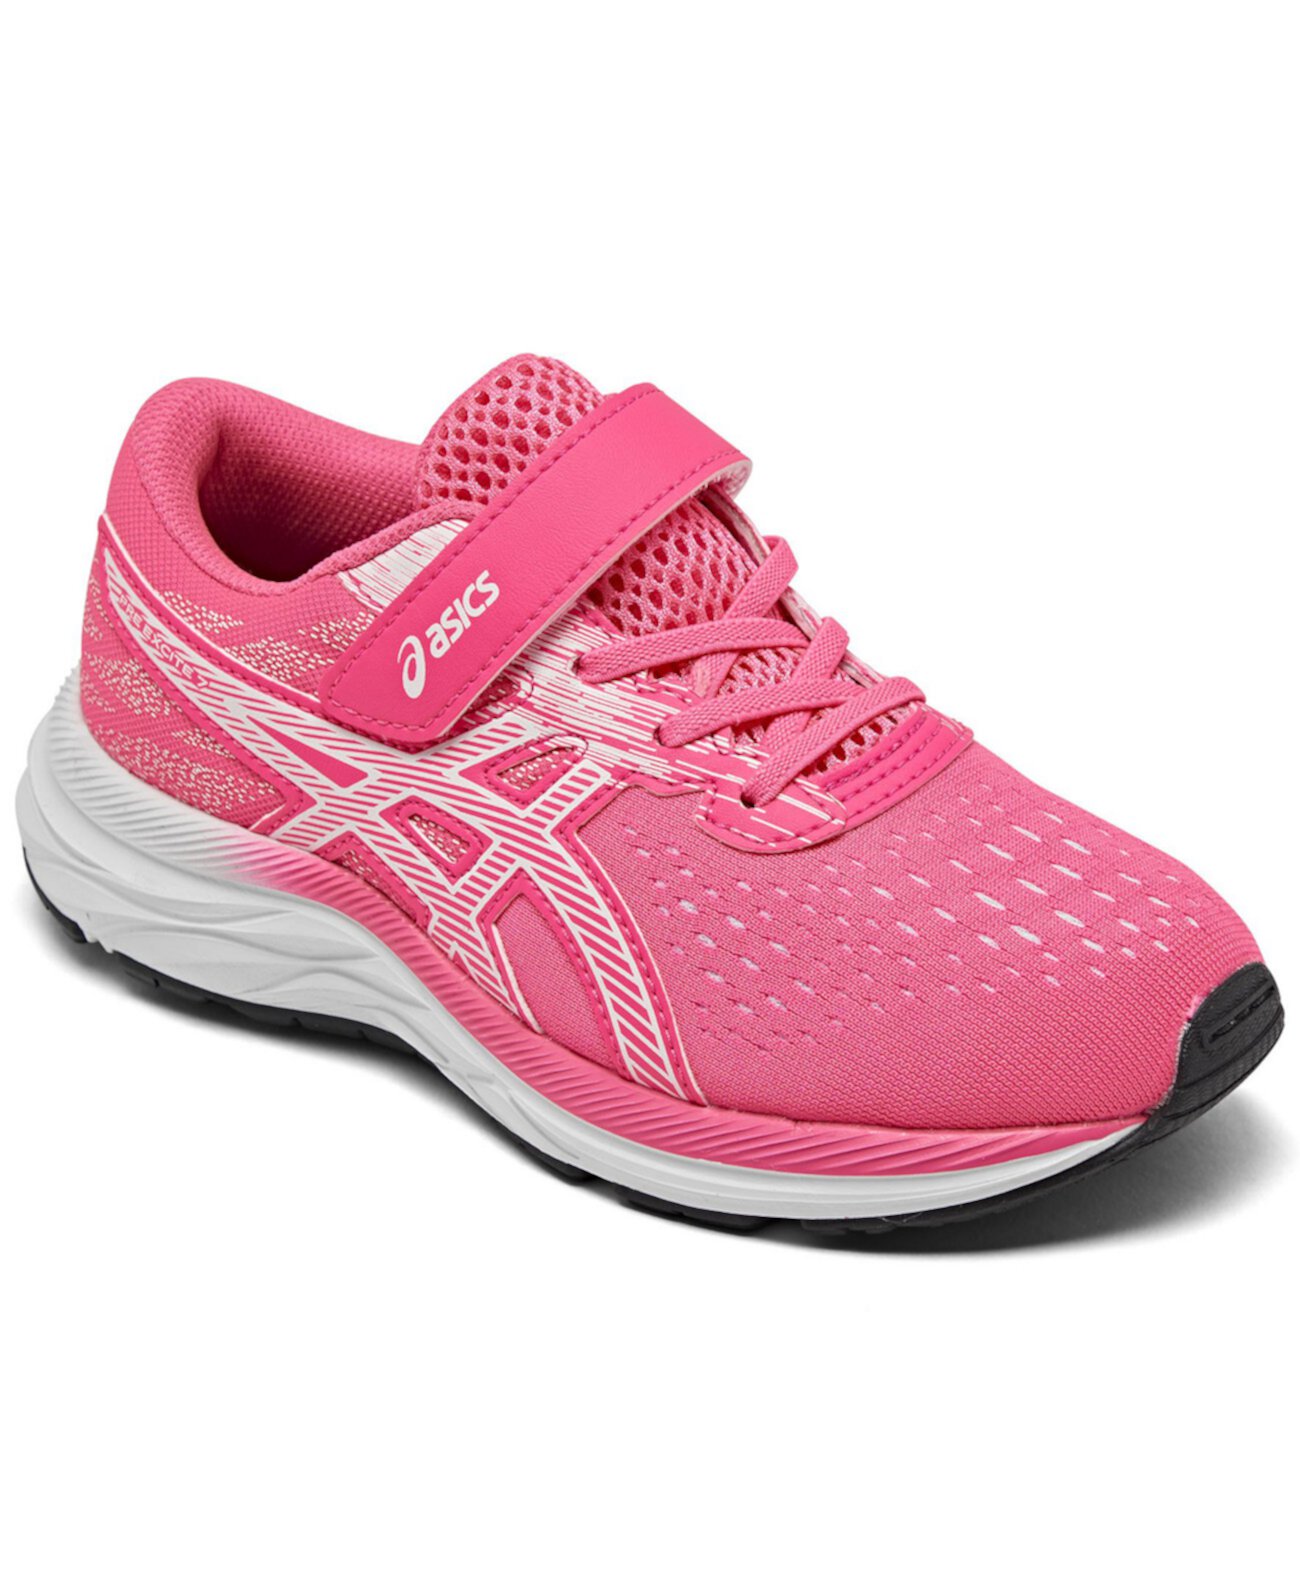 Little Girls Pre Excite 7 Running Sneakers from Finish Line ASICS